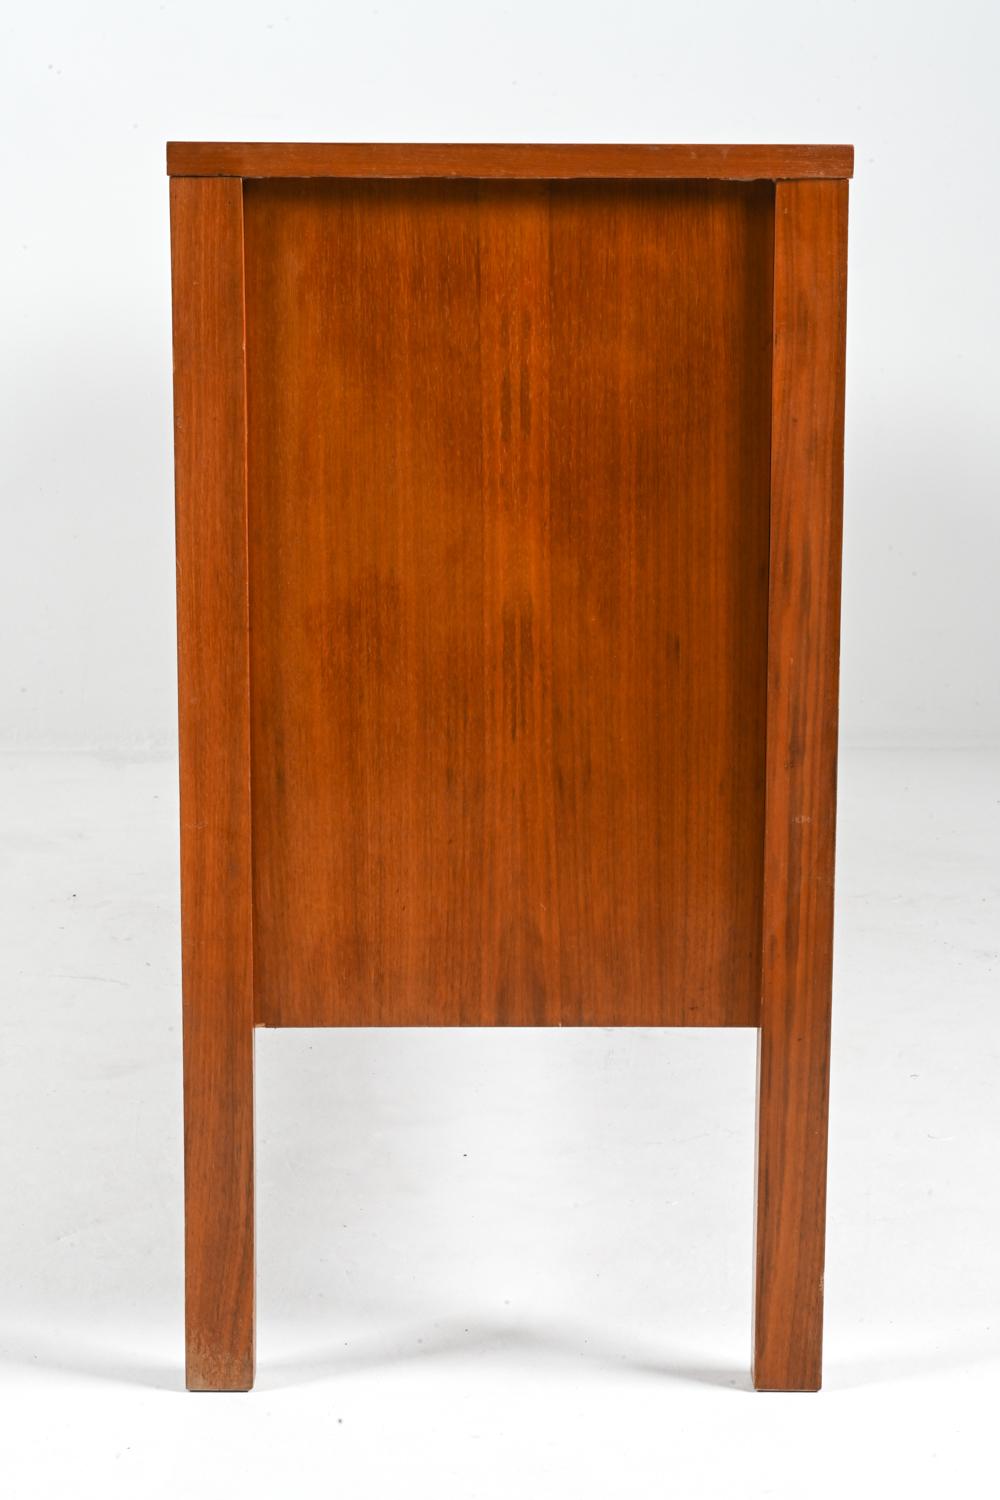 German Mid-Century Teak Woven-Front Sideboard by Leo Bub, c. 1960 For Sale 6